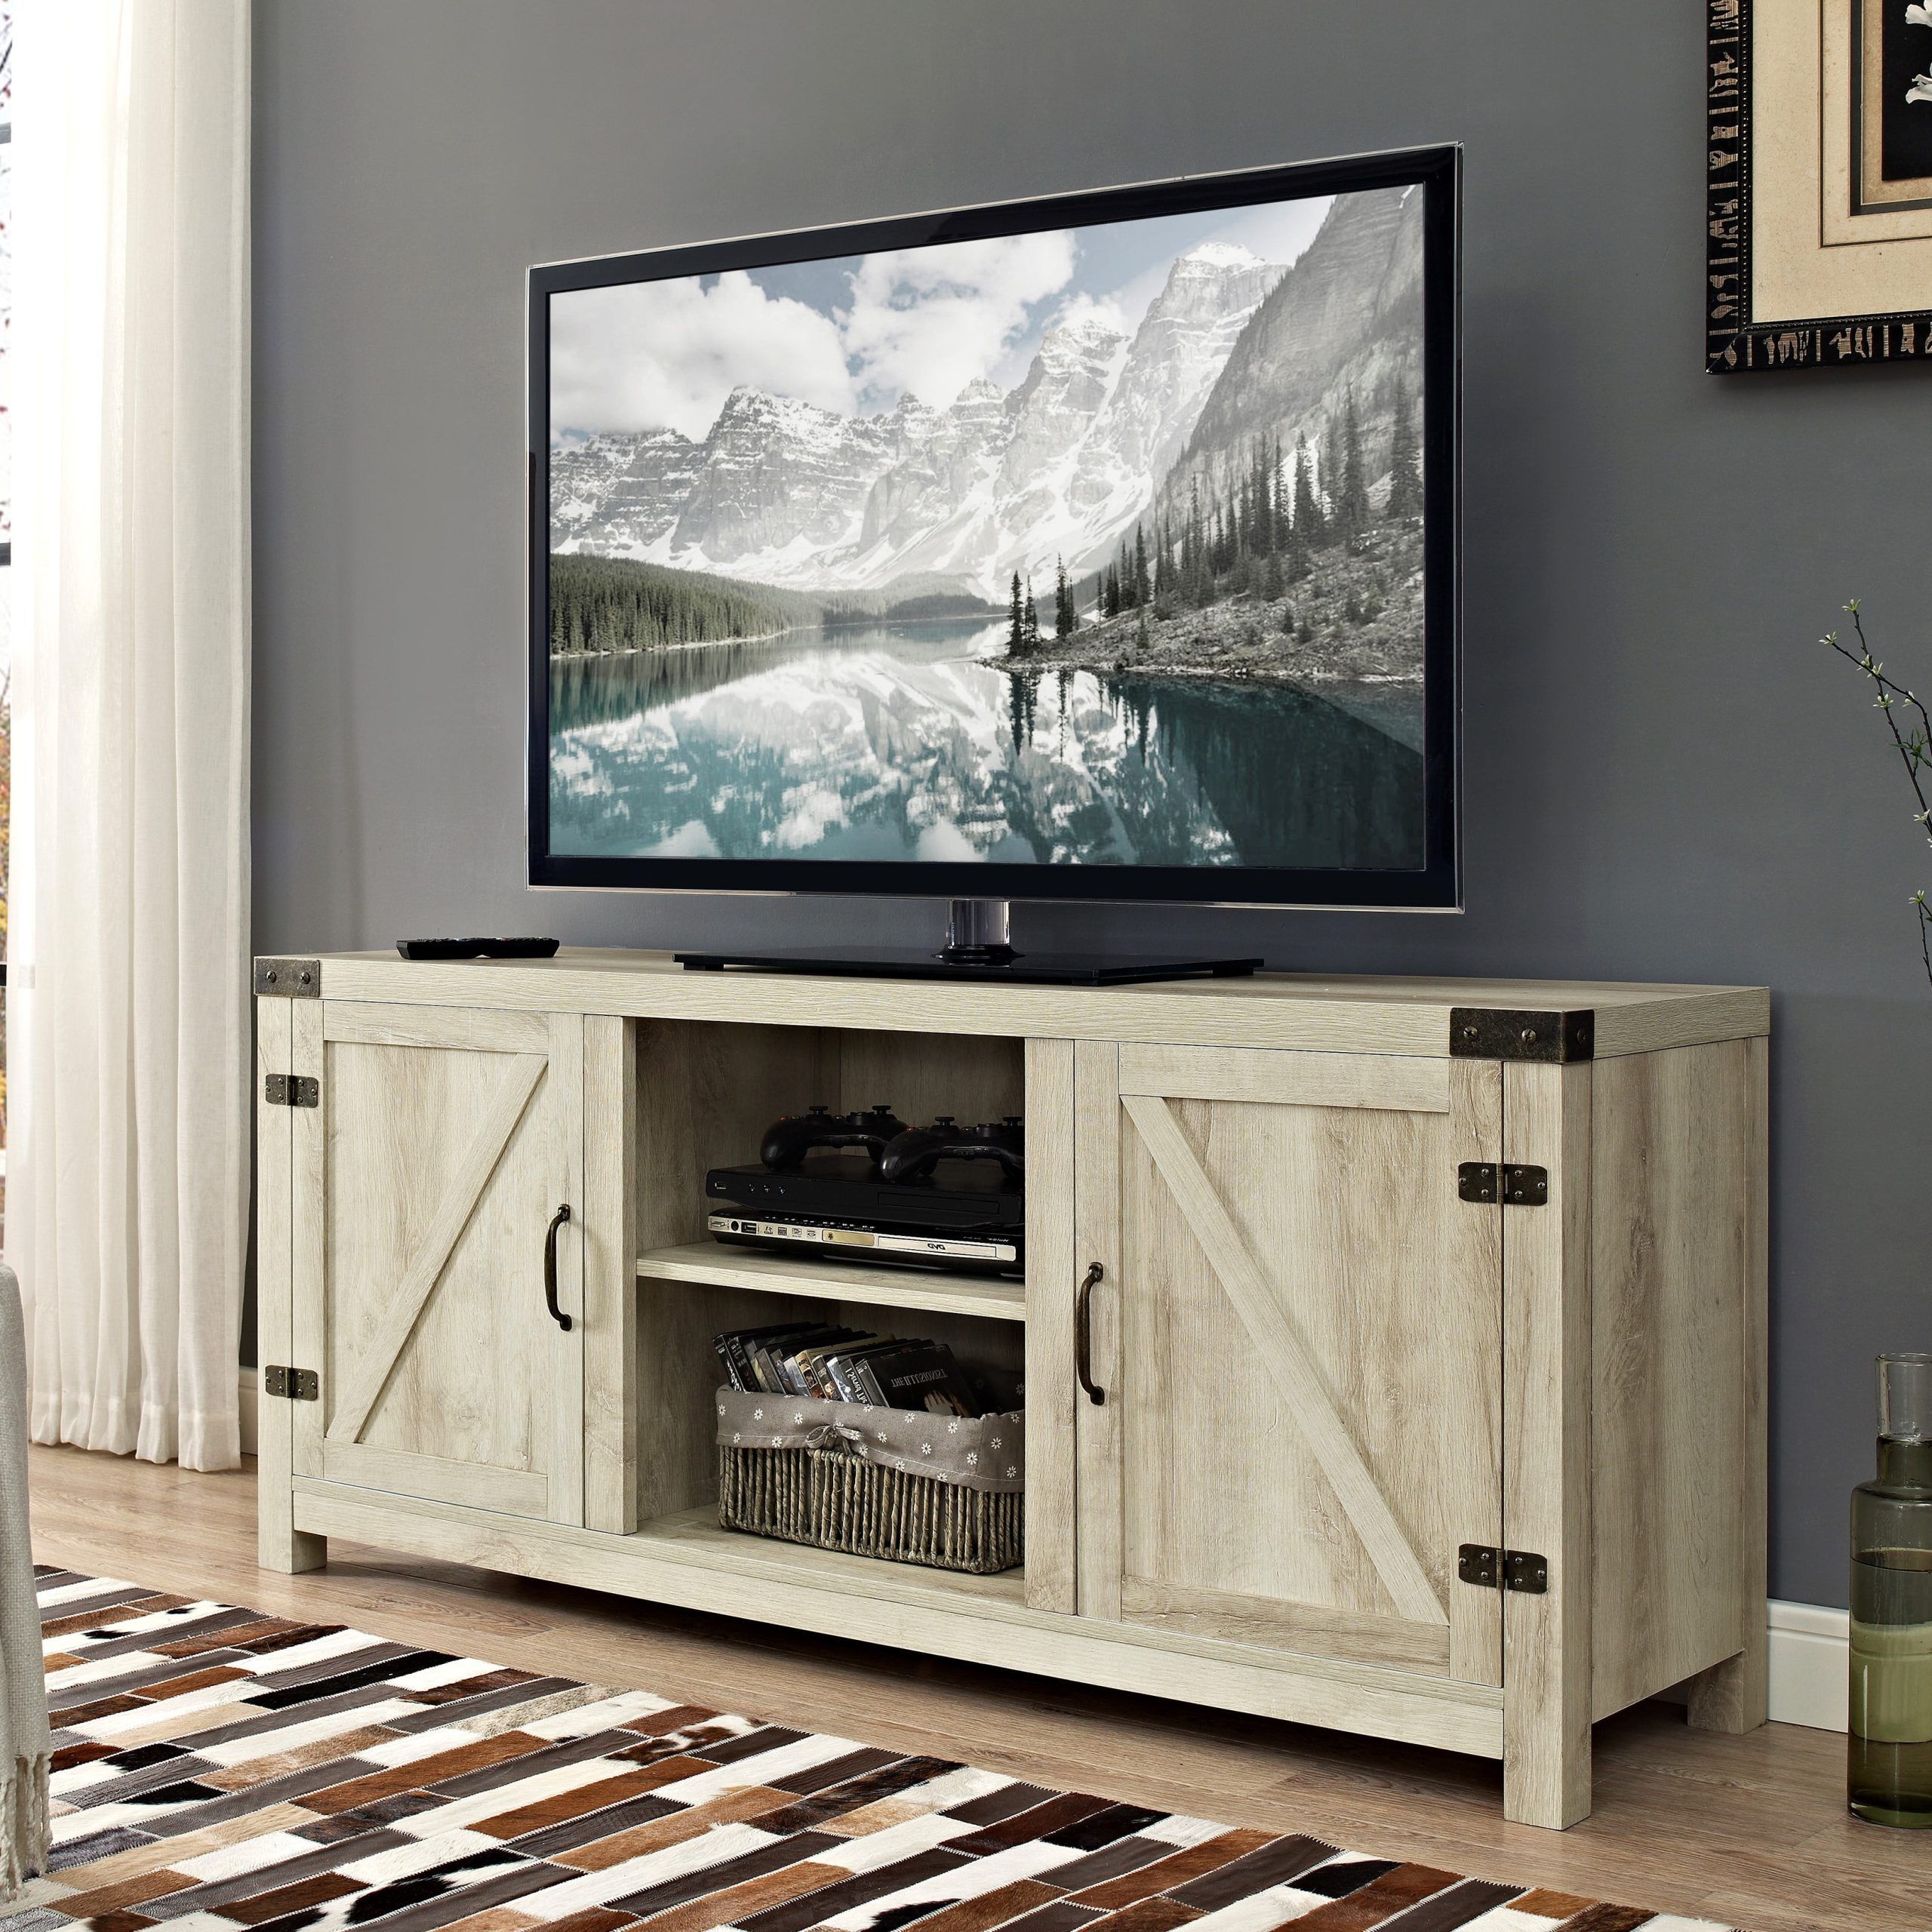 Woven Paths Modern Farmhouse Barn Door Tv Stand For Tvs Up To 65 Intended For Preferred Modern Farmhouse Barn Tv Stands (View 3 of 15)